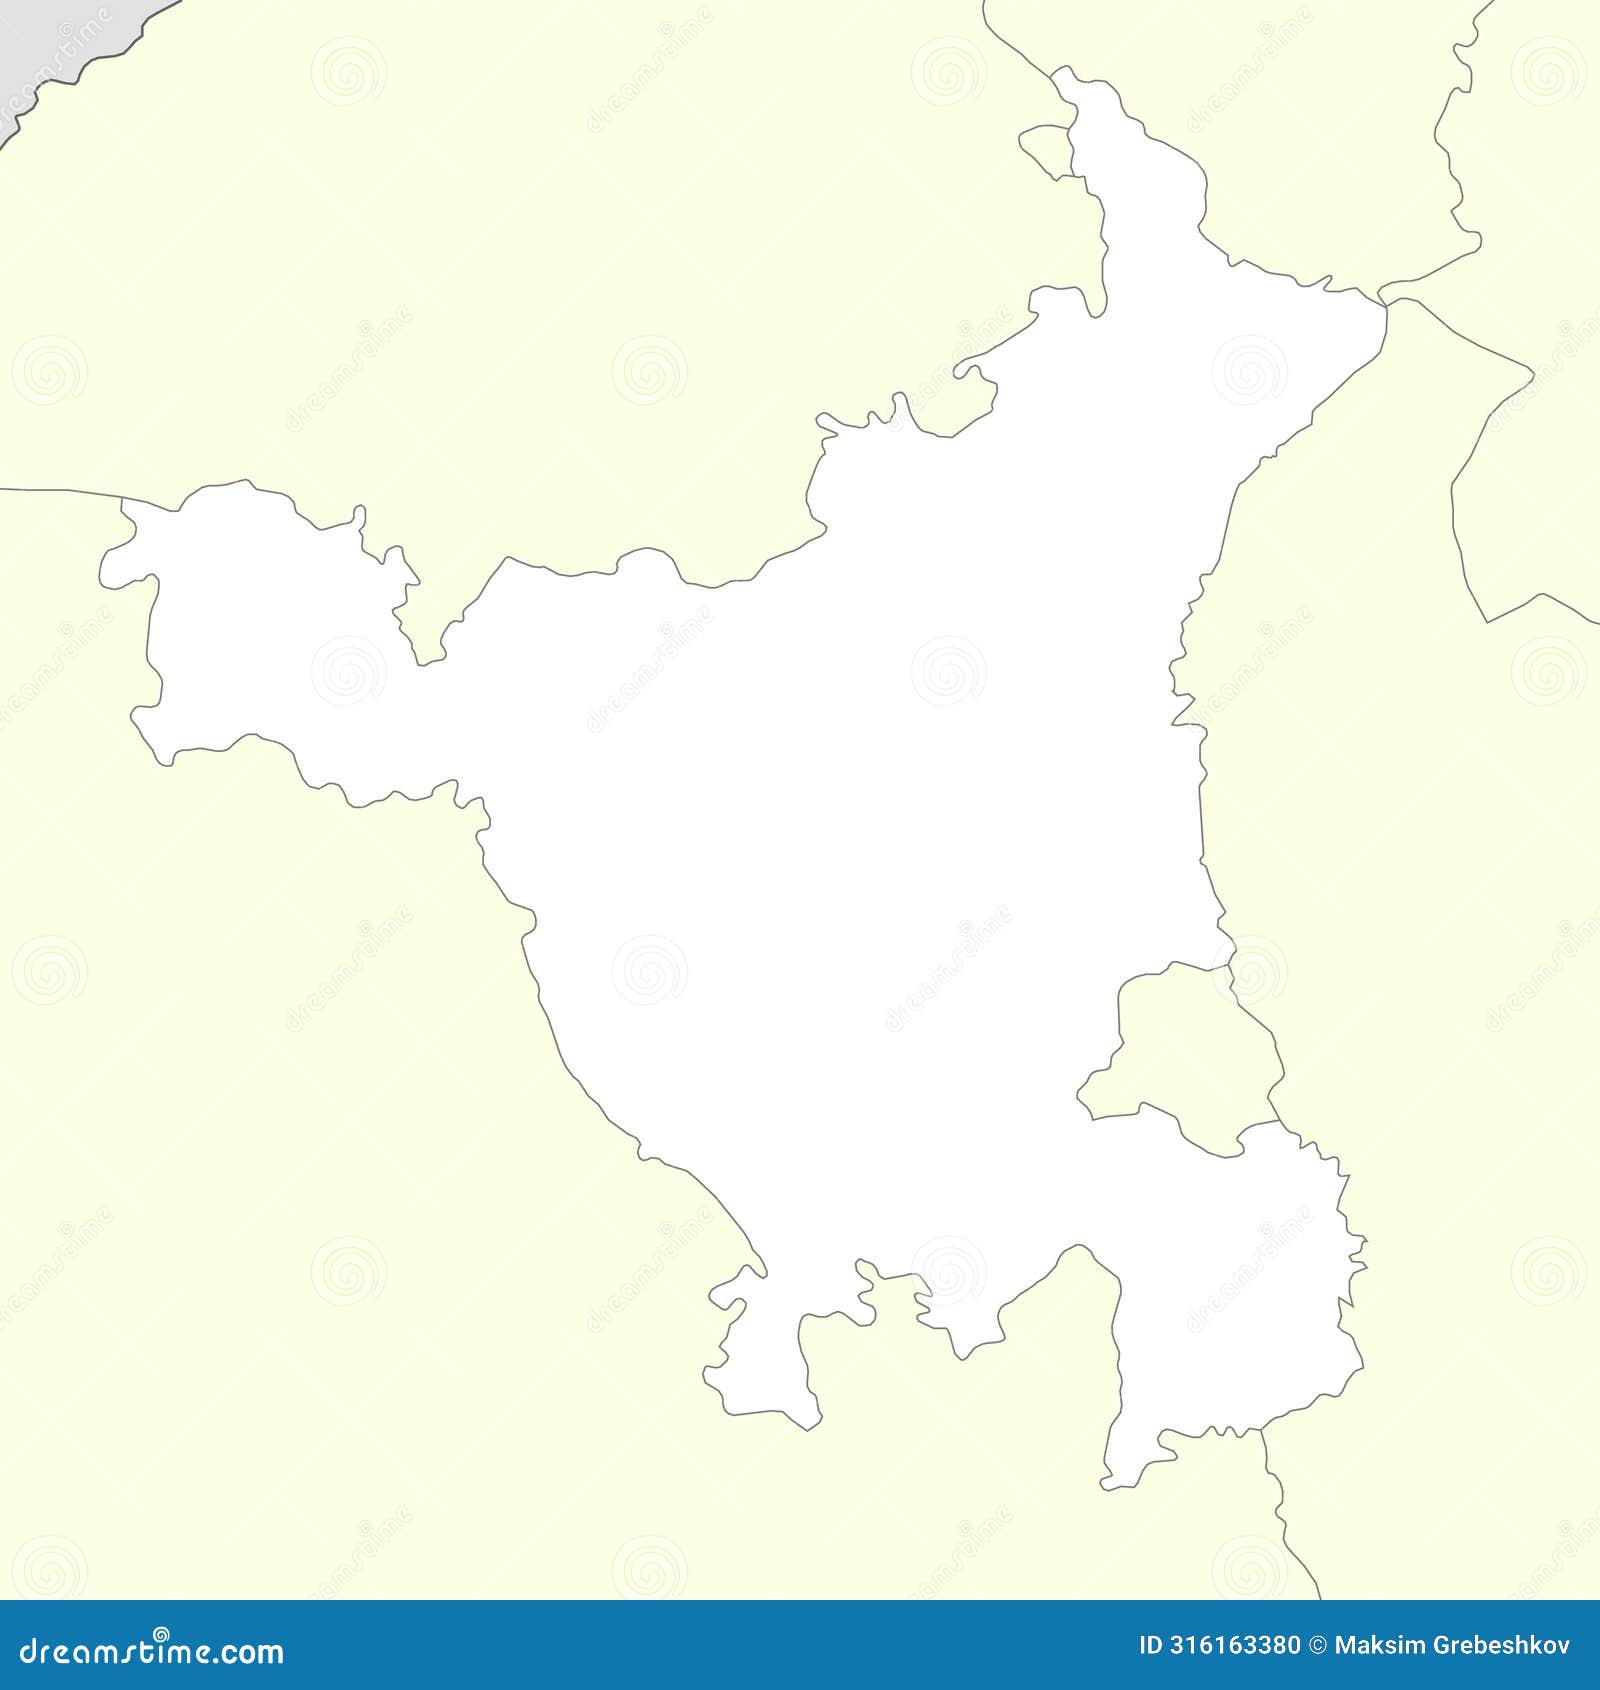 location map of haryana is a state of india